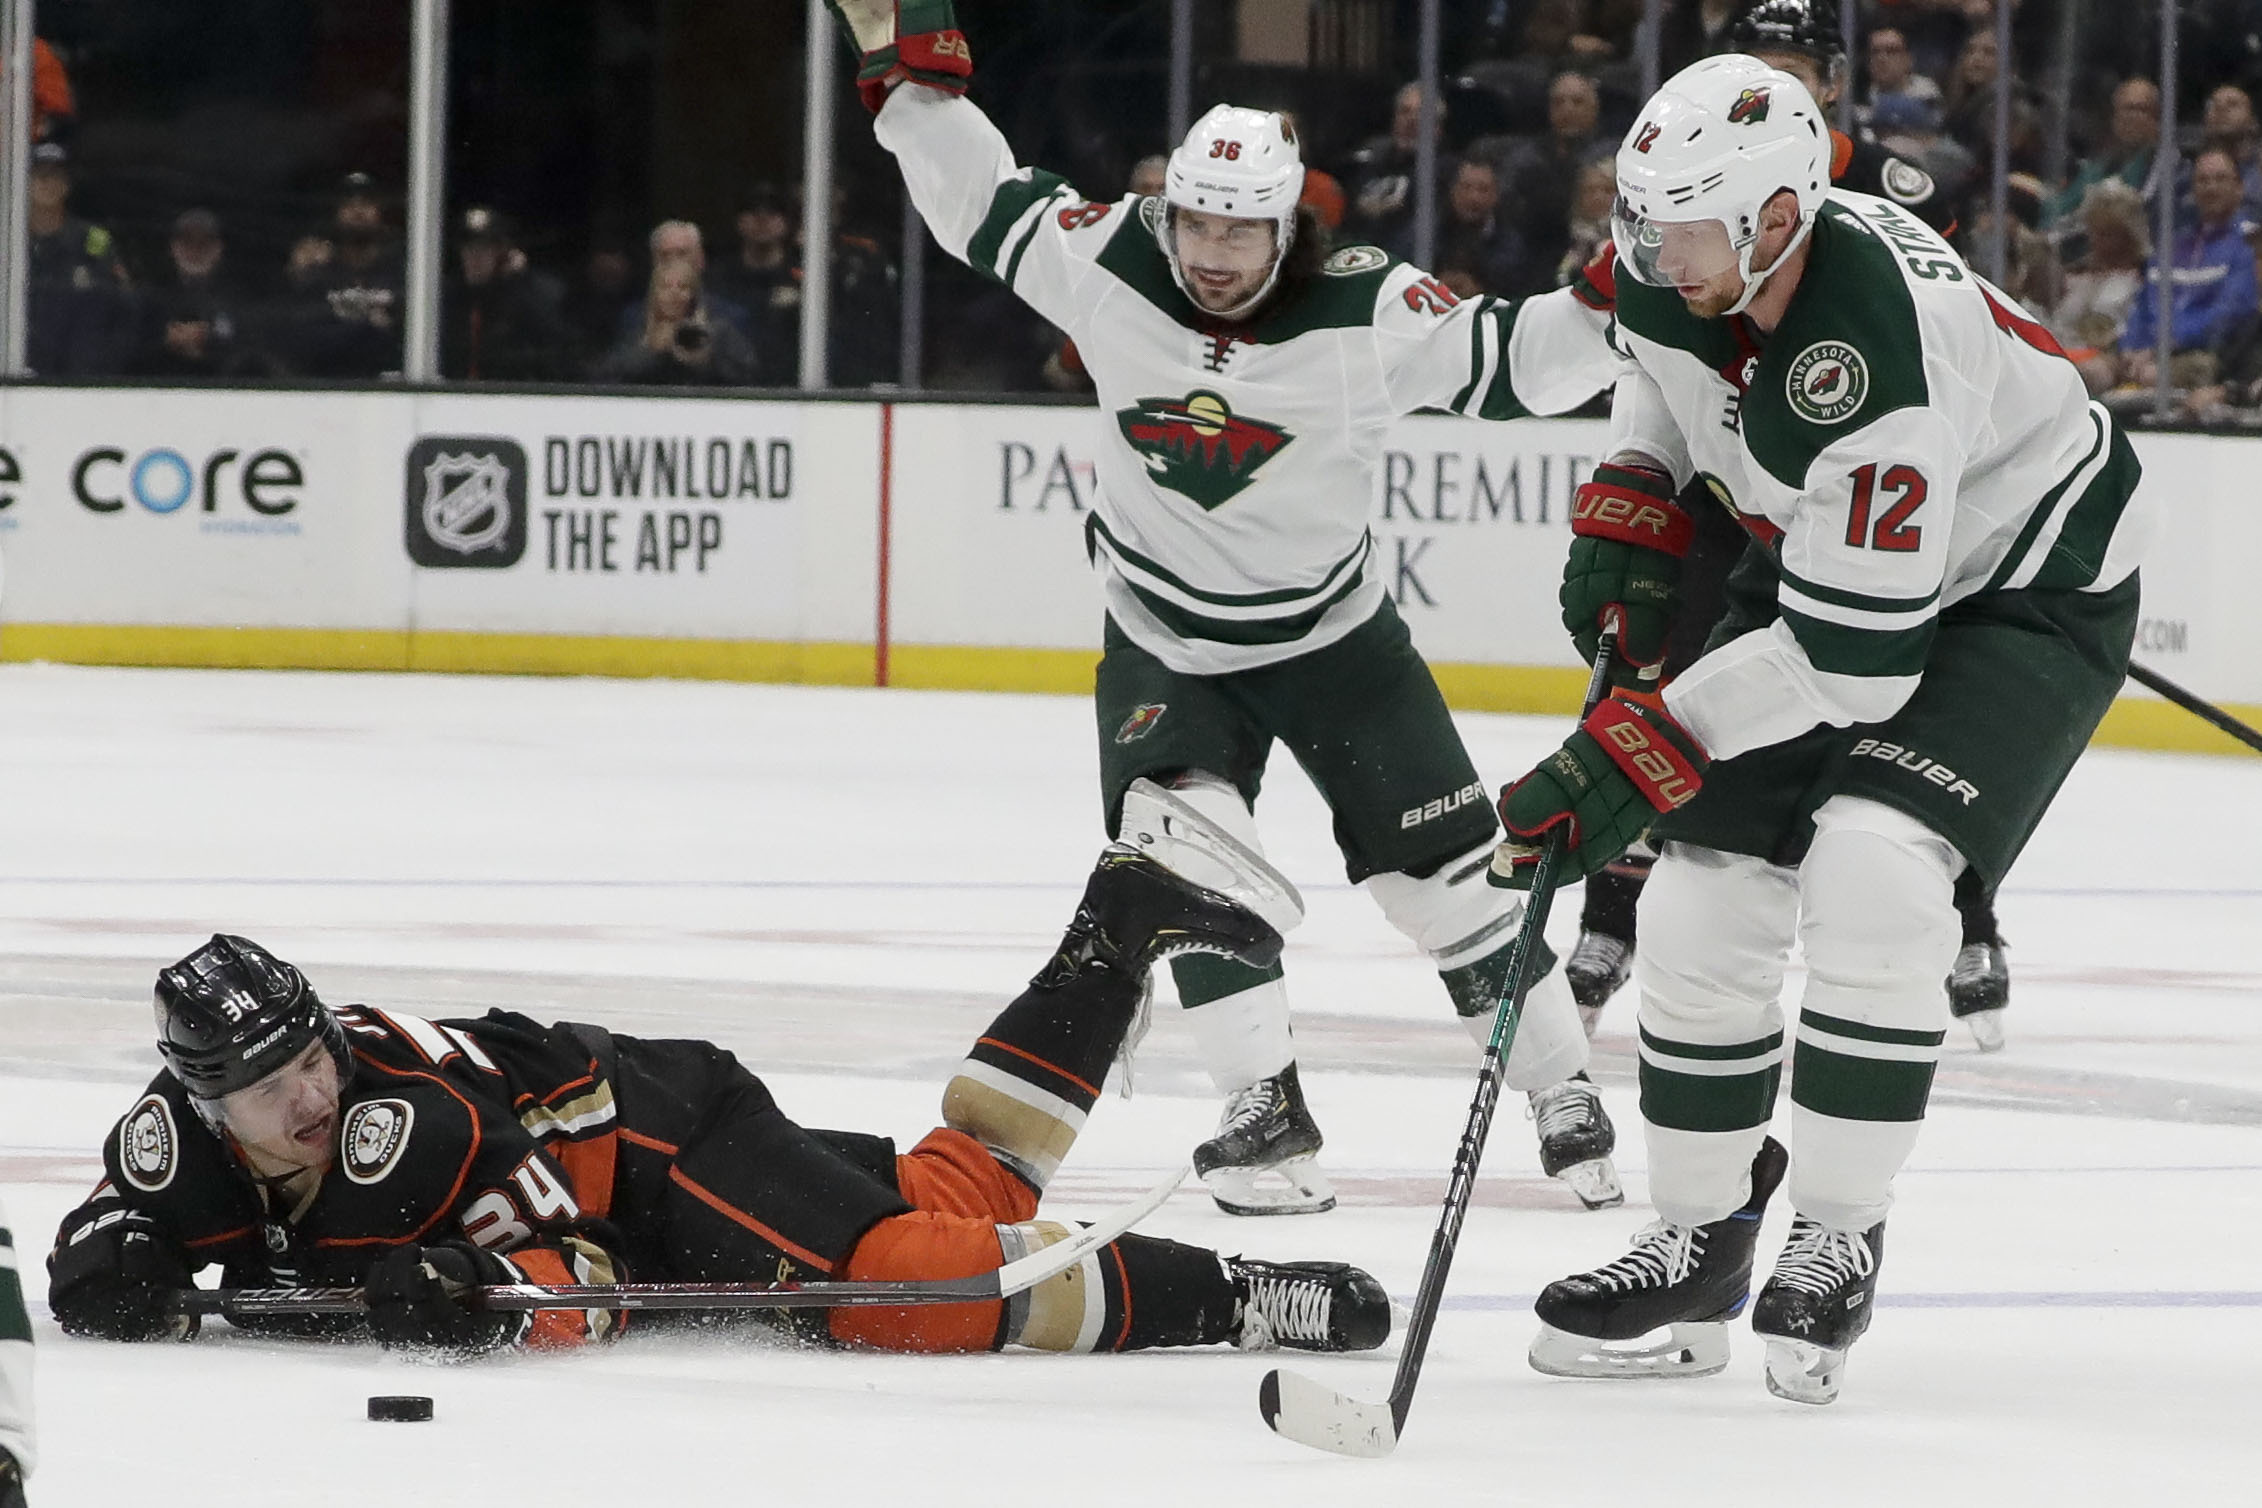 Zuccarello, Staal lead Wild's rally to 4-2 win over Ducks